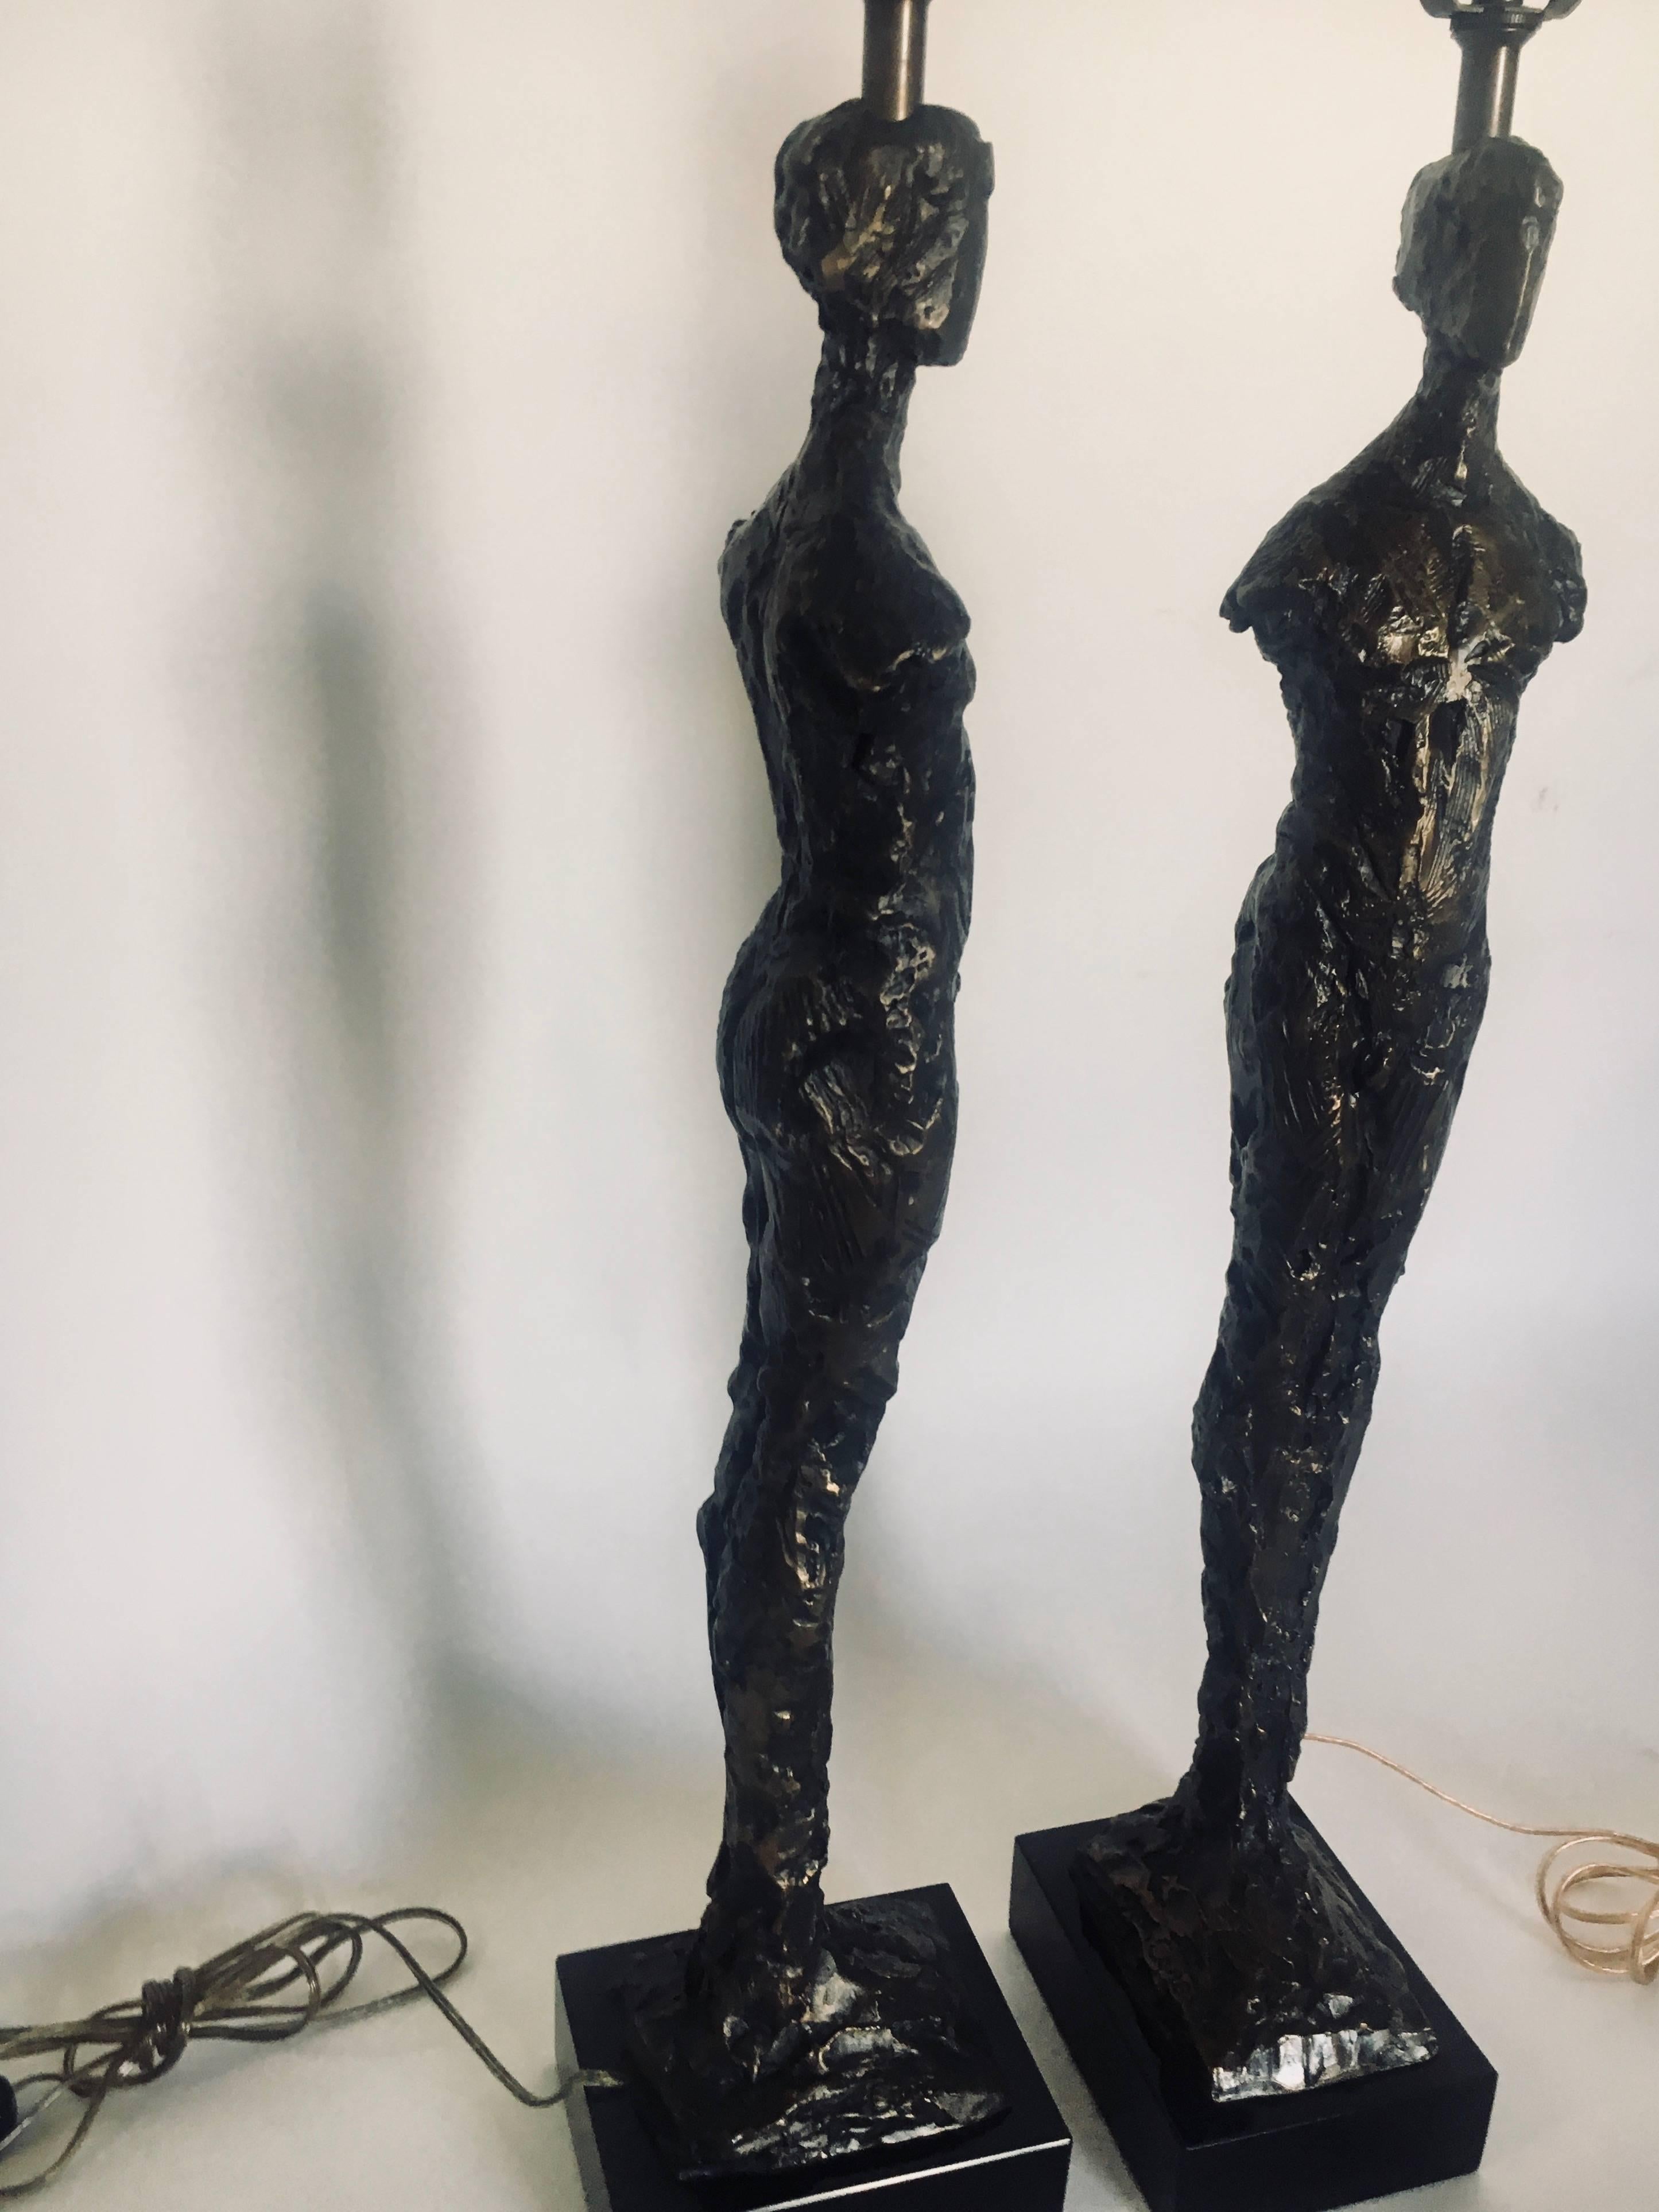 Pair of Tom Corbin bronze Adam lamps with bronze finials. A stunning pair for any room signed by the artist. Strongly reminiscent of Diego Giacometti.